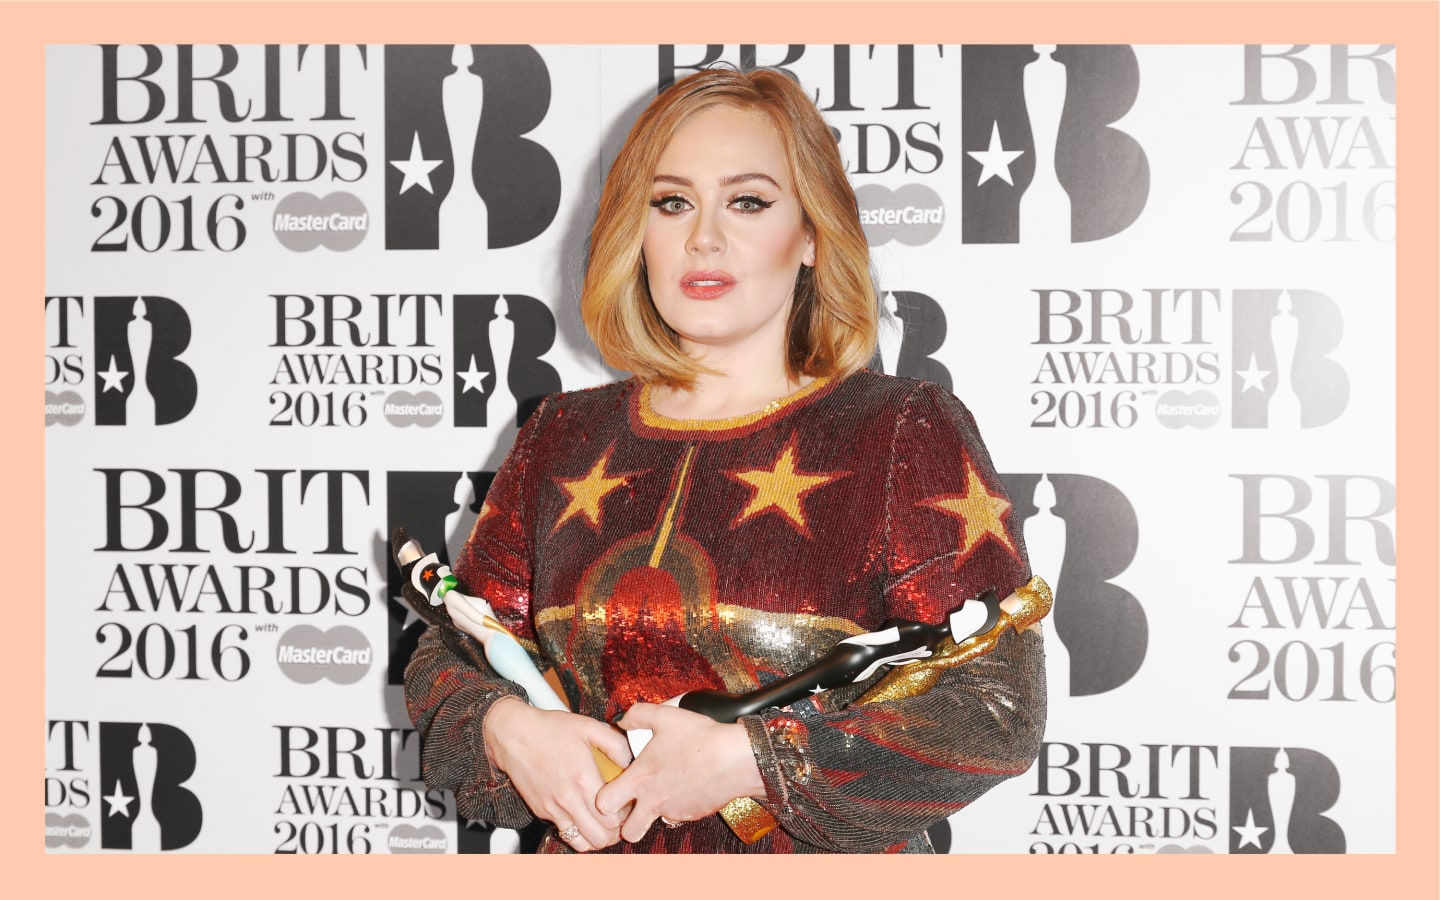 What Winning A BRIT Award Really Means